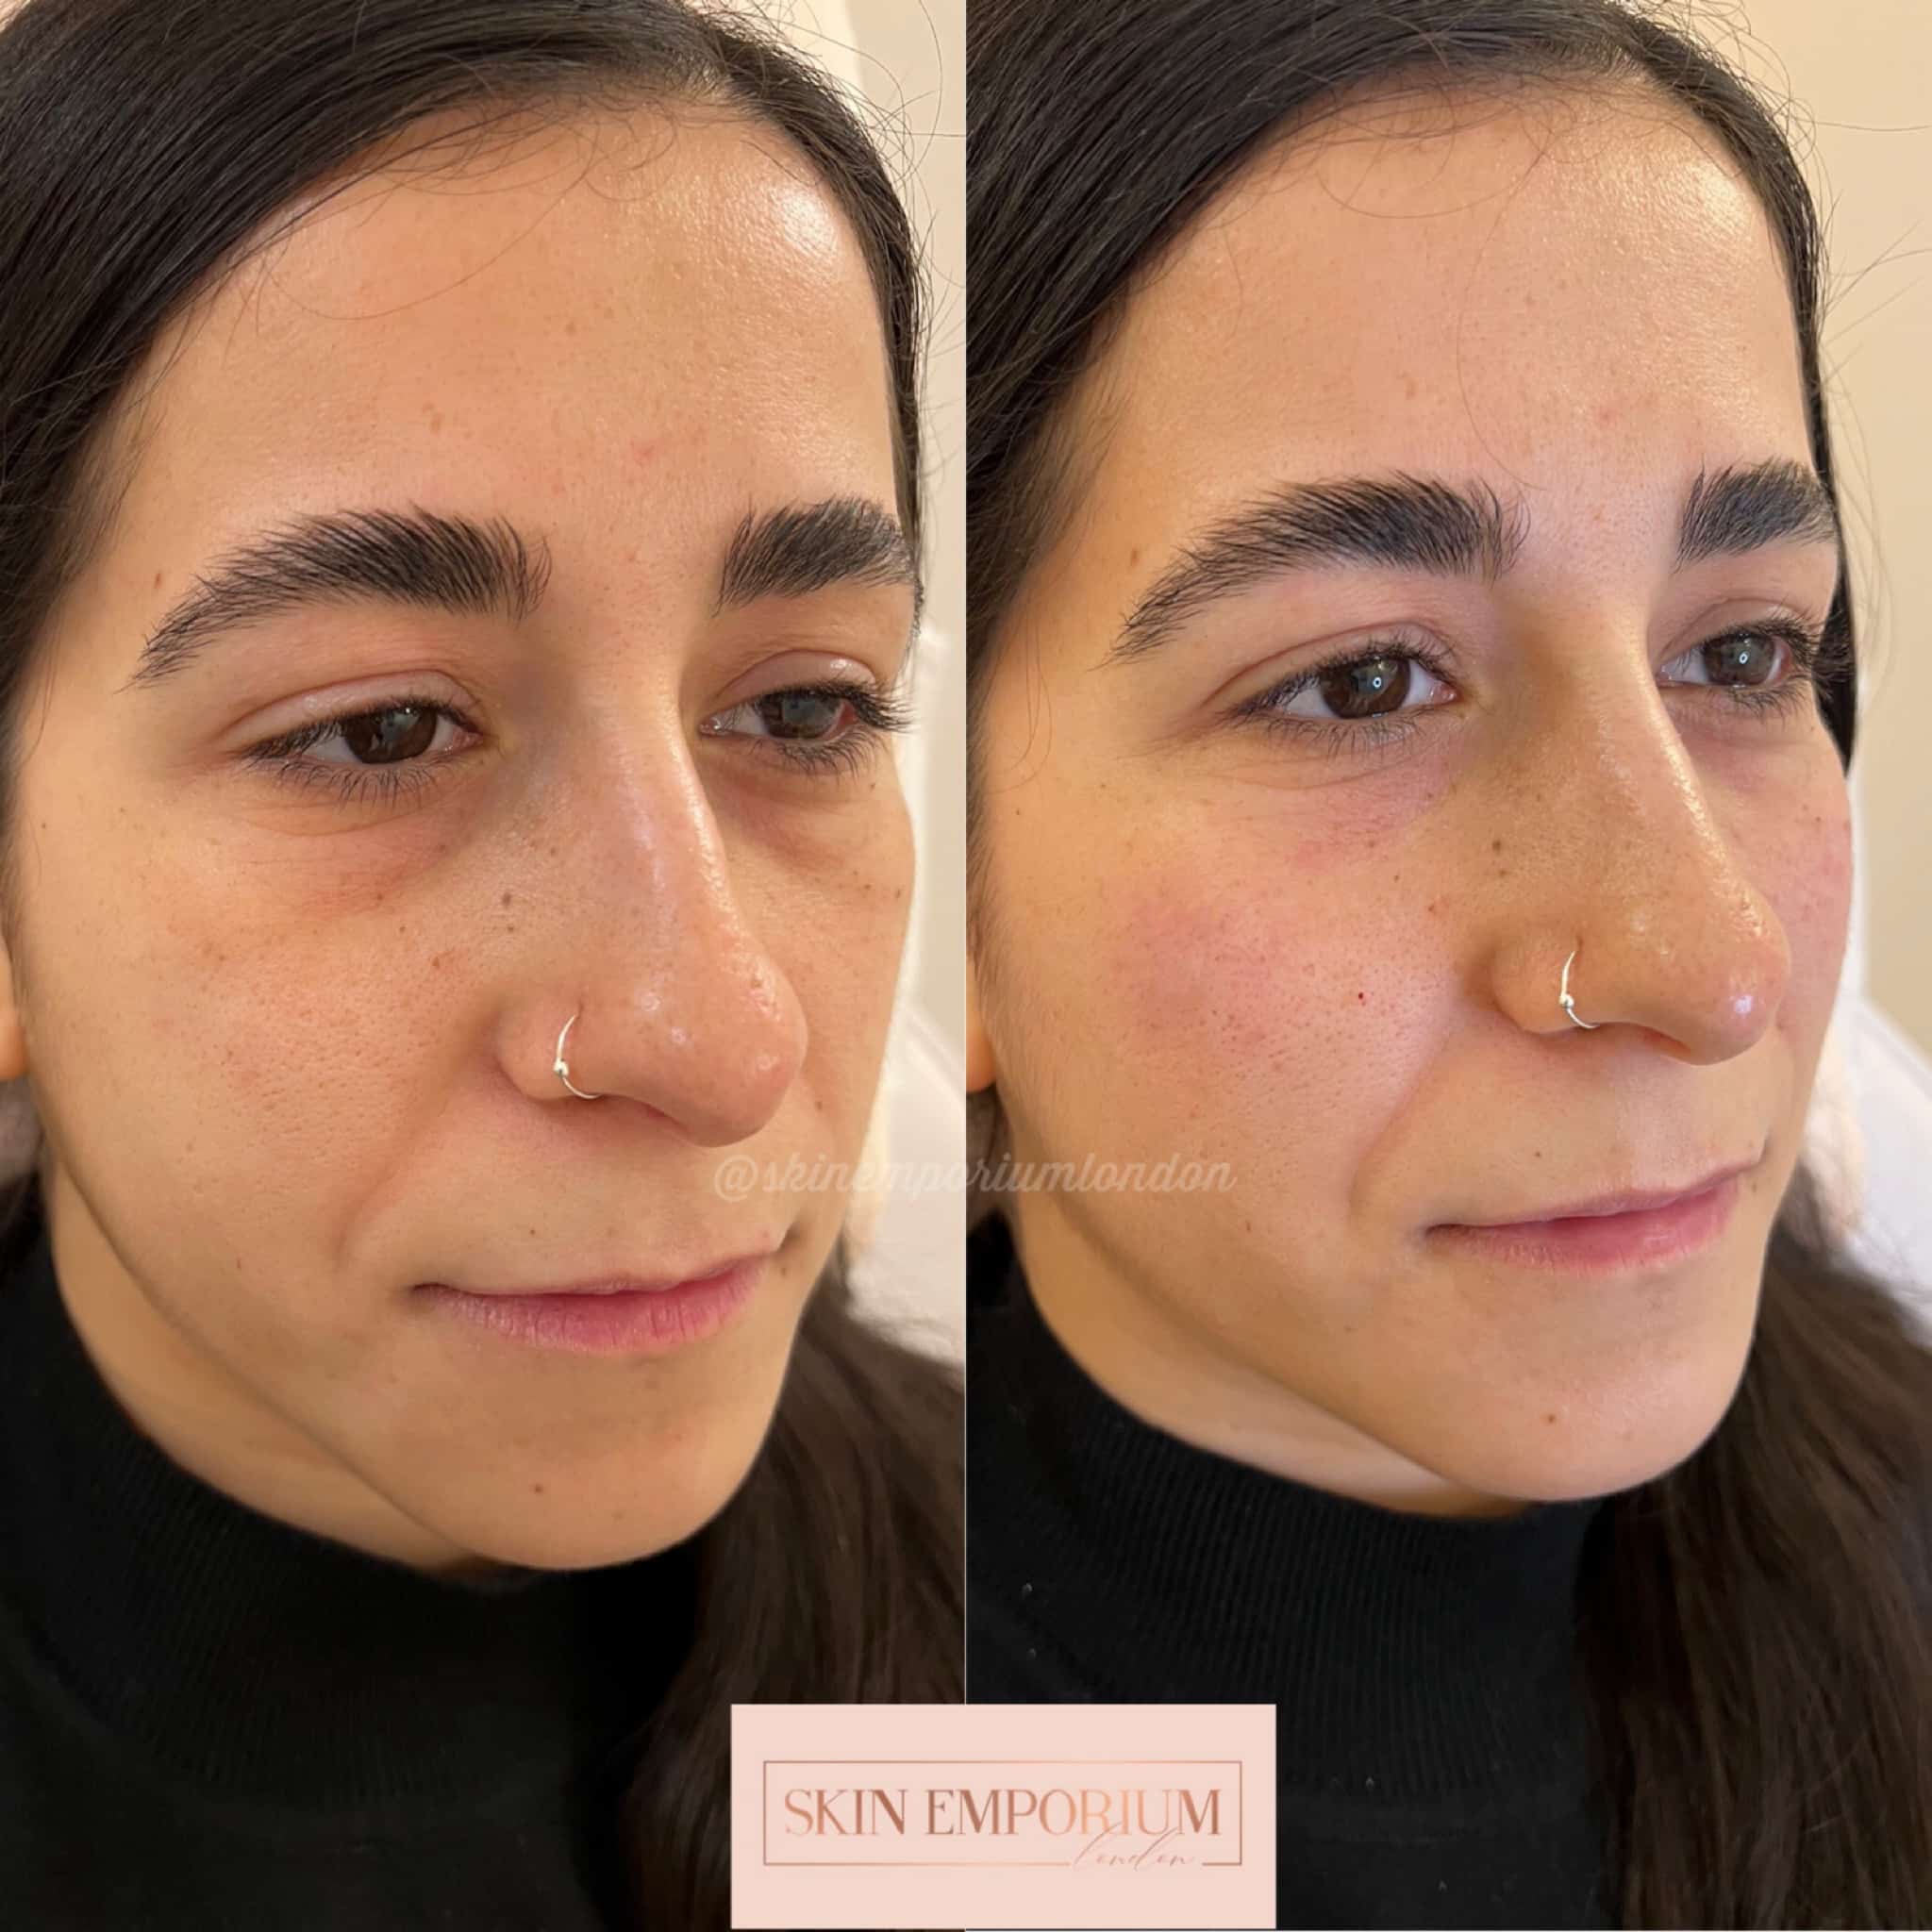 Before and after photo of a women having received chin dermsl fillers at the Skin Emporium in Clapham, London.